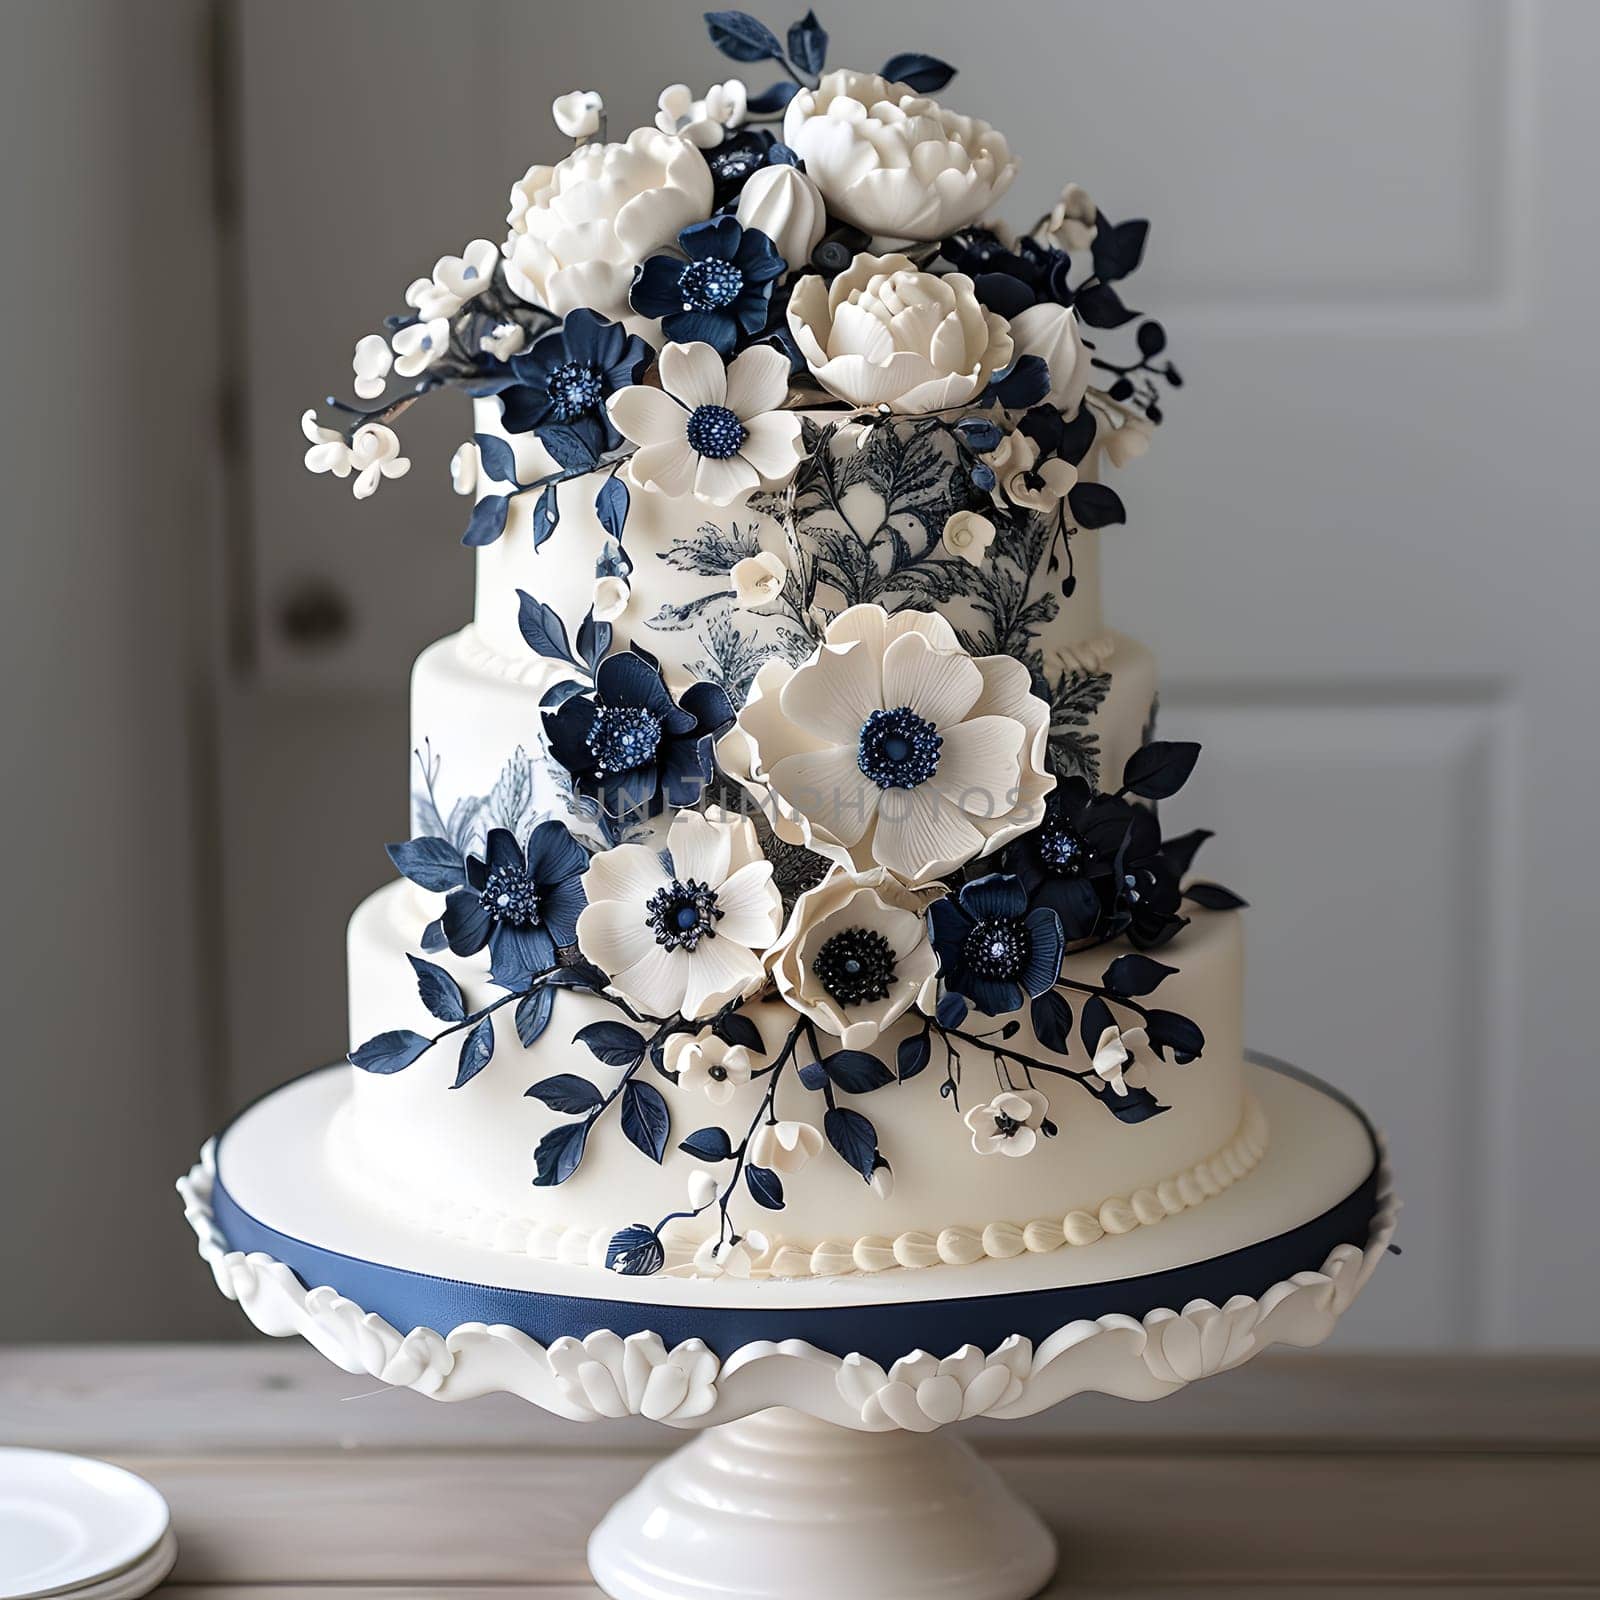 Threetiered wedding cake adorned with blue and white flowers on a stand by Nadtochiy